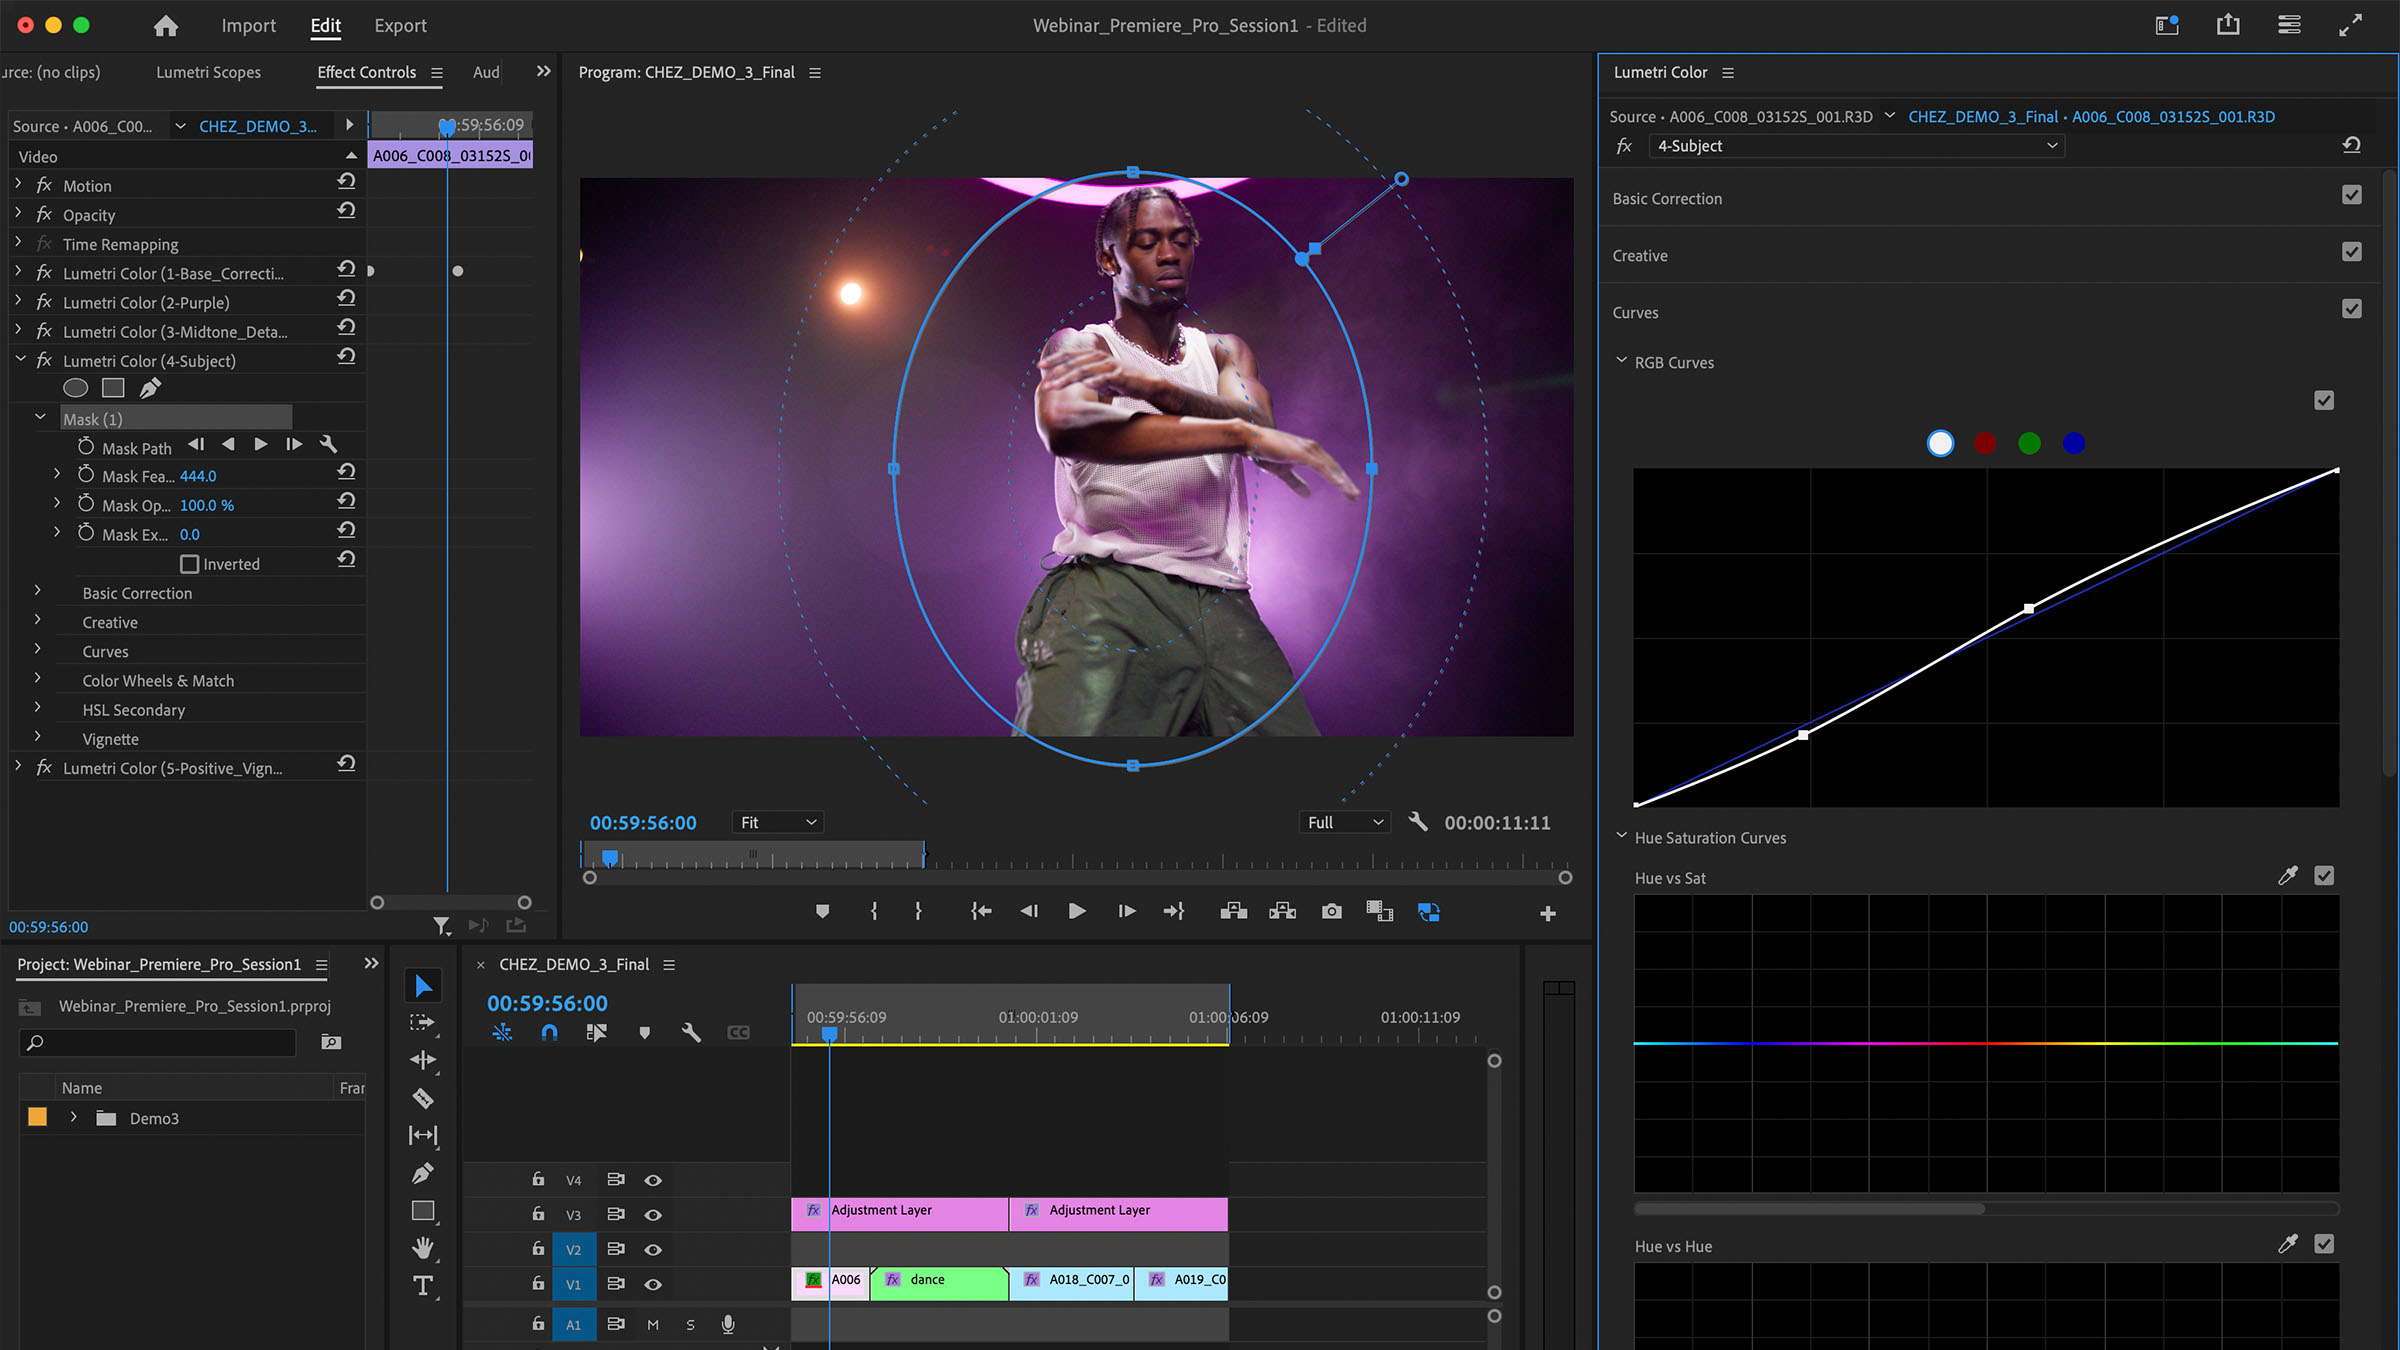 Frame.io Connections: Color Grading Essentials in Premiere Pro